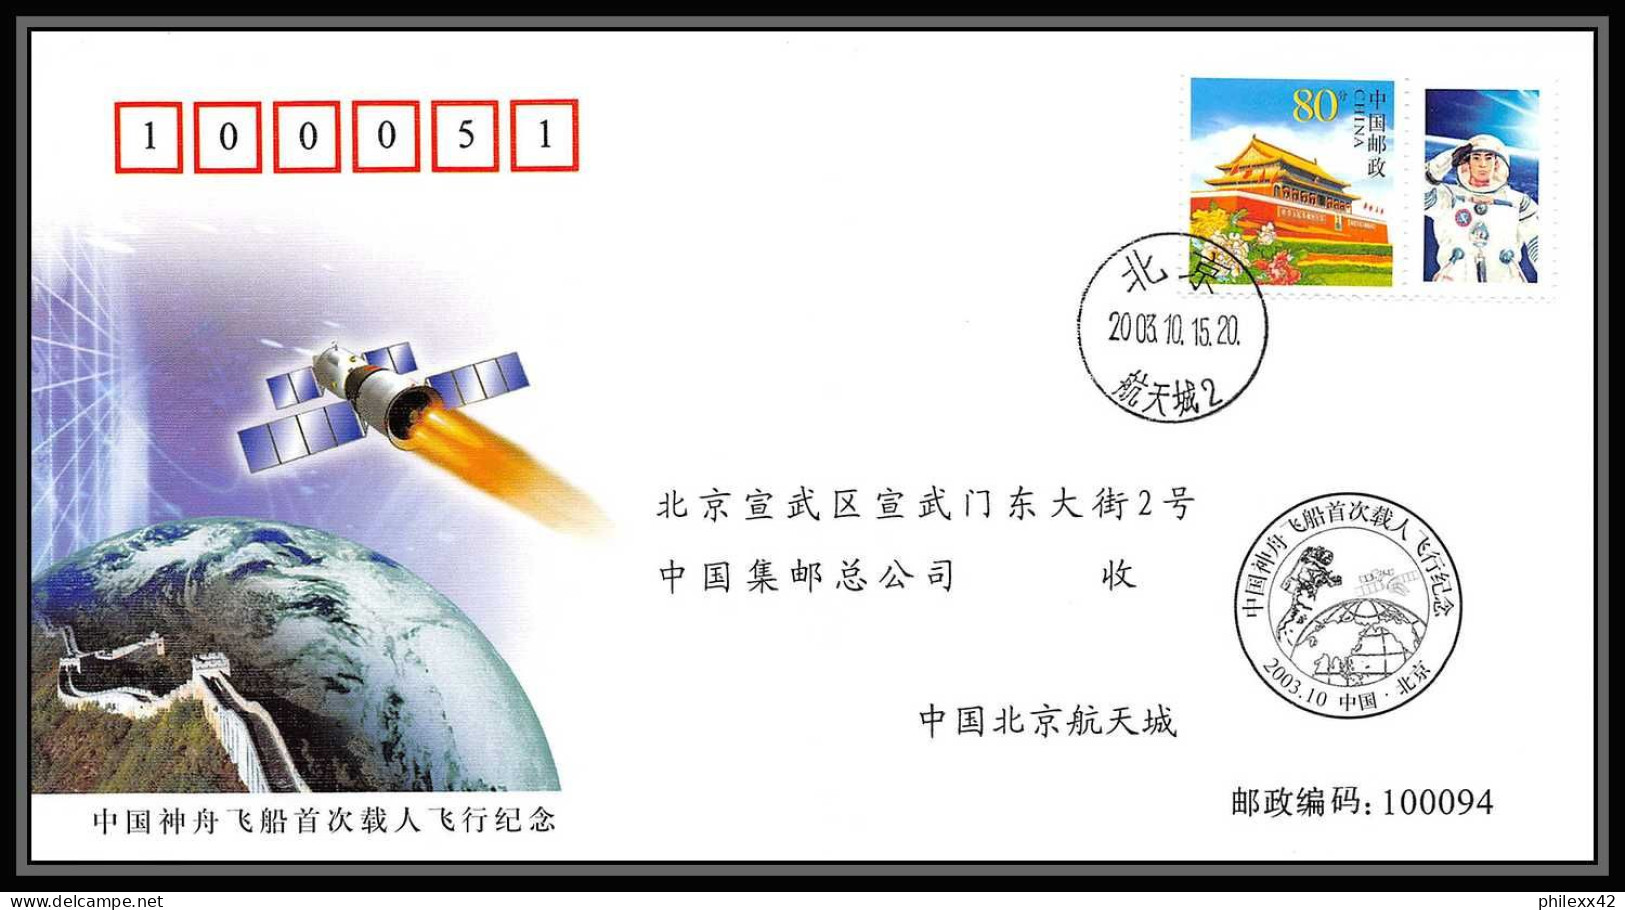 1326 Espace (space Raumfahrt) Lettre (cover Briefe) CHINE China 16/10/2003 First Manned Spaceship Shenzhou Li Pingzhong - Asia